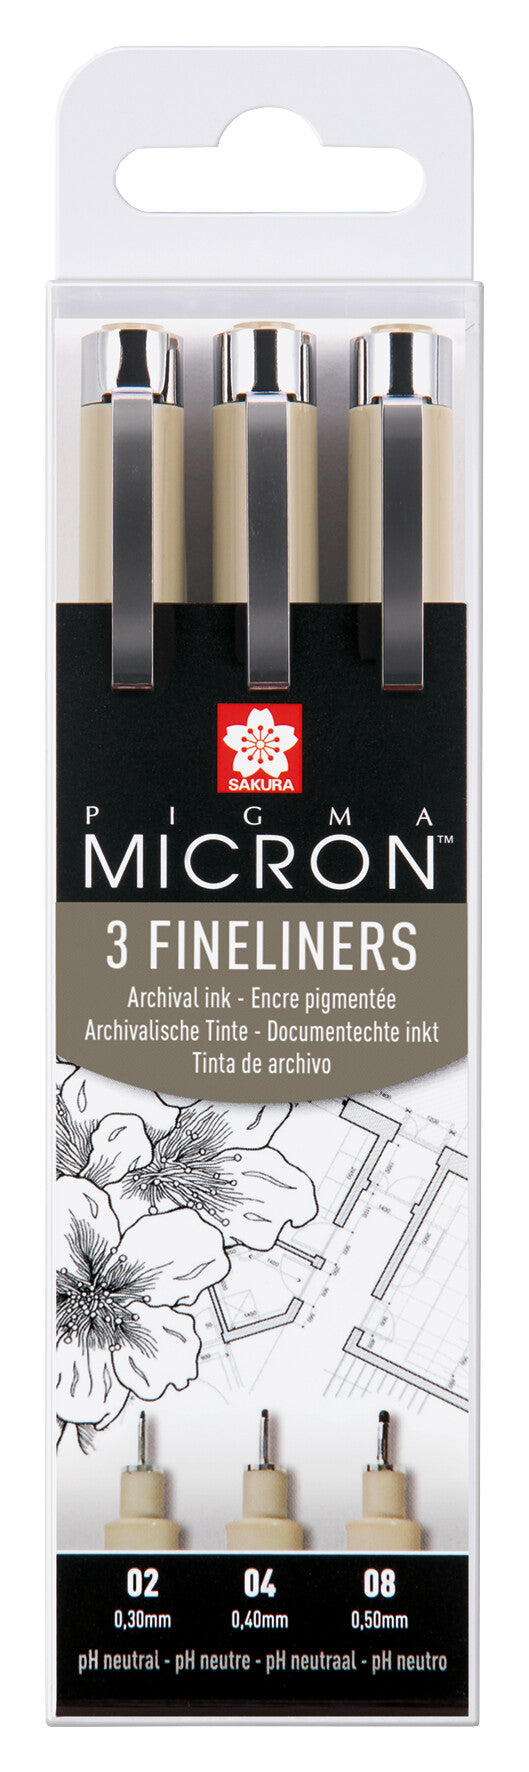 Pigma Micron set of 3 Fineliners